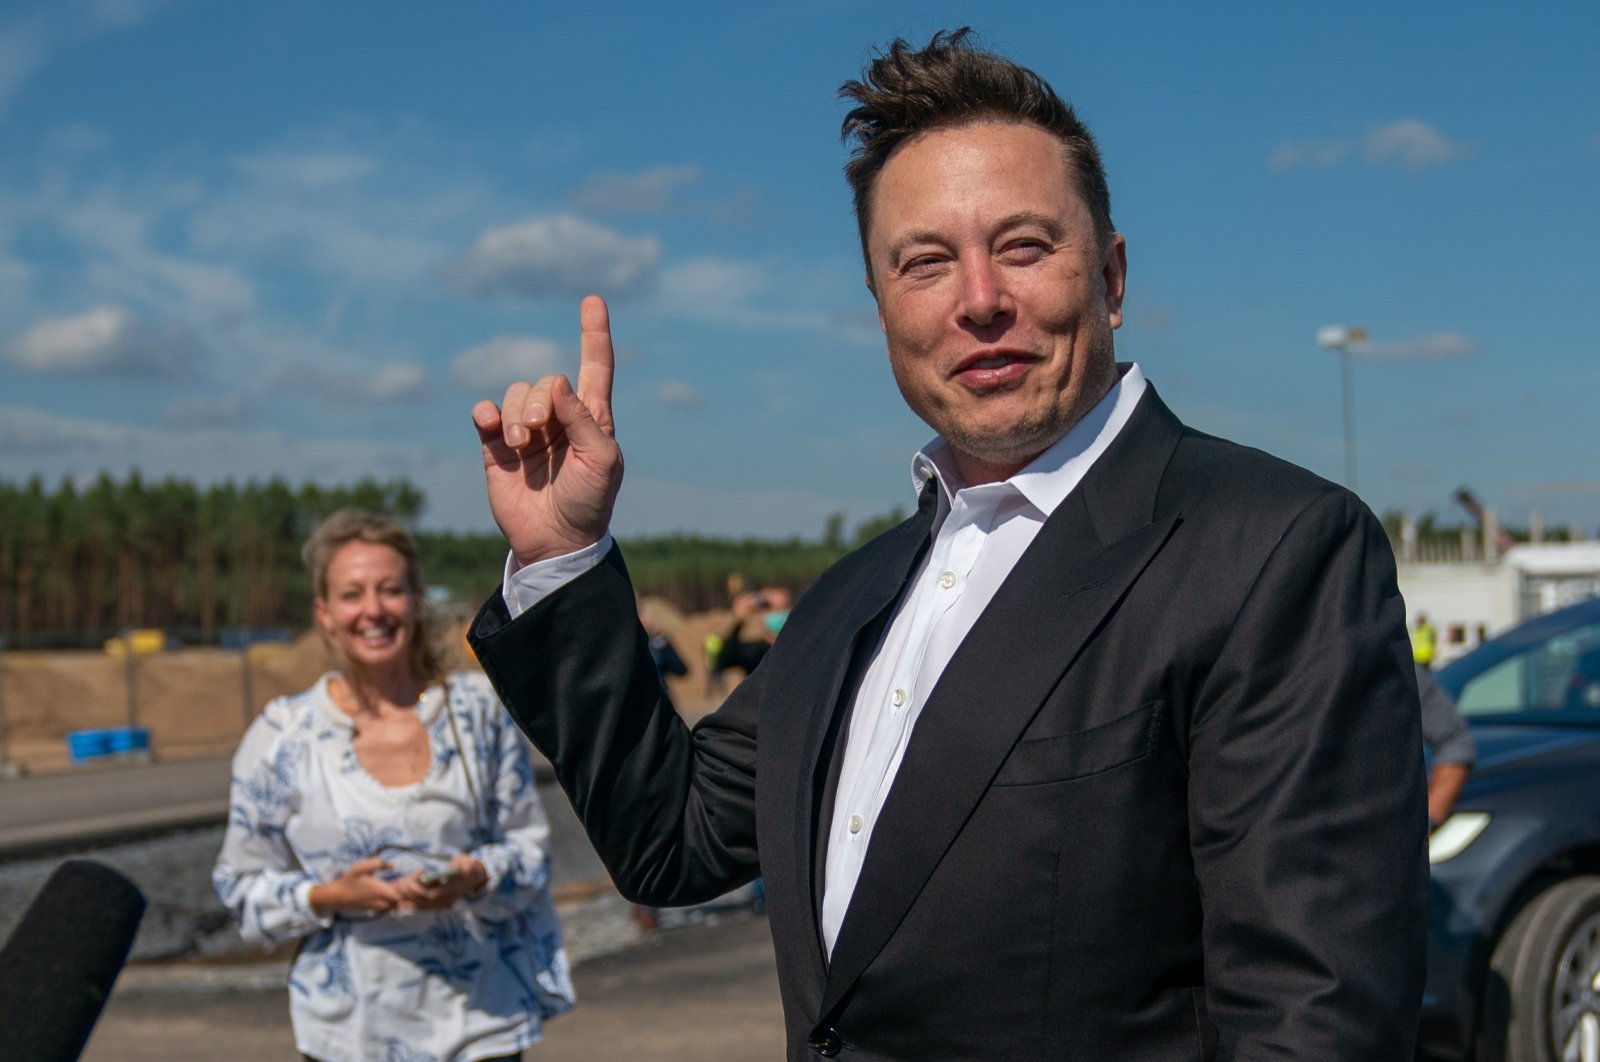 Tesla and SpaceX founder Elon Musk (R) gives a statement at the construction site of the Tesla Giga Factory in Gruenheide near Berlin, Germany, Sept. 3, 2020. (EPA Photo)